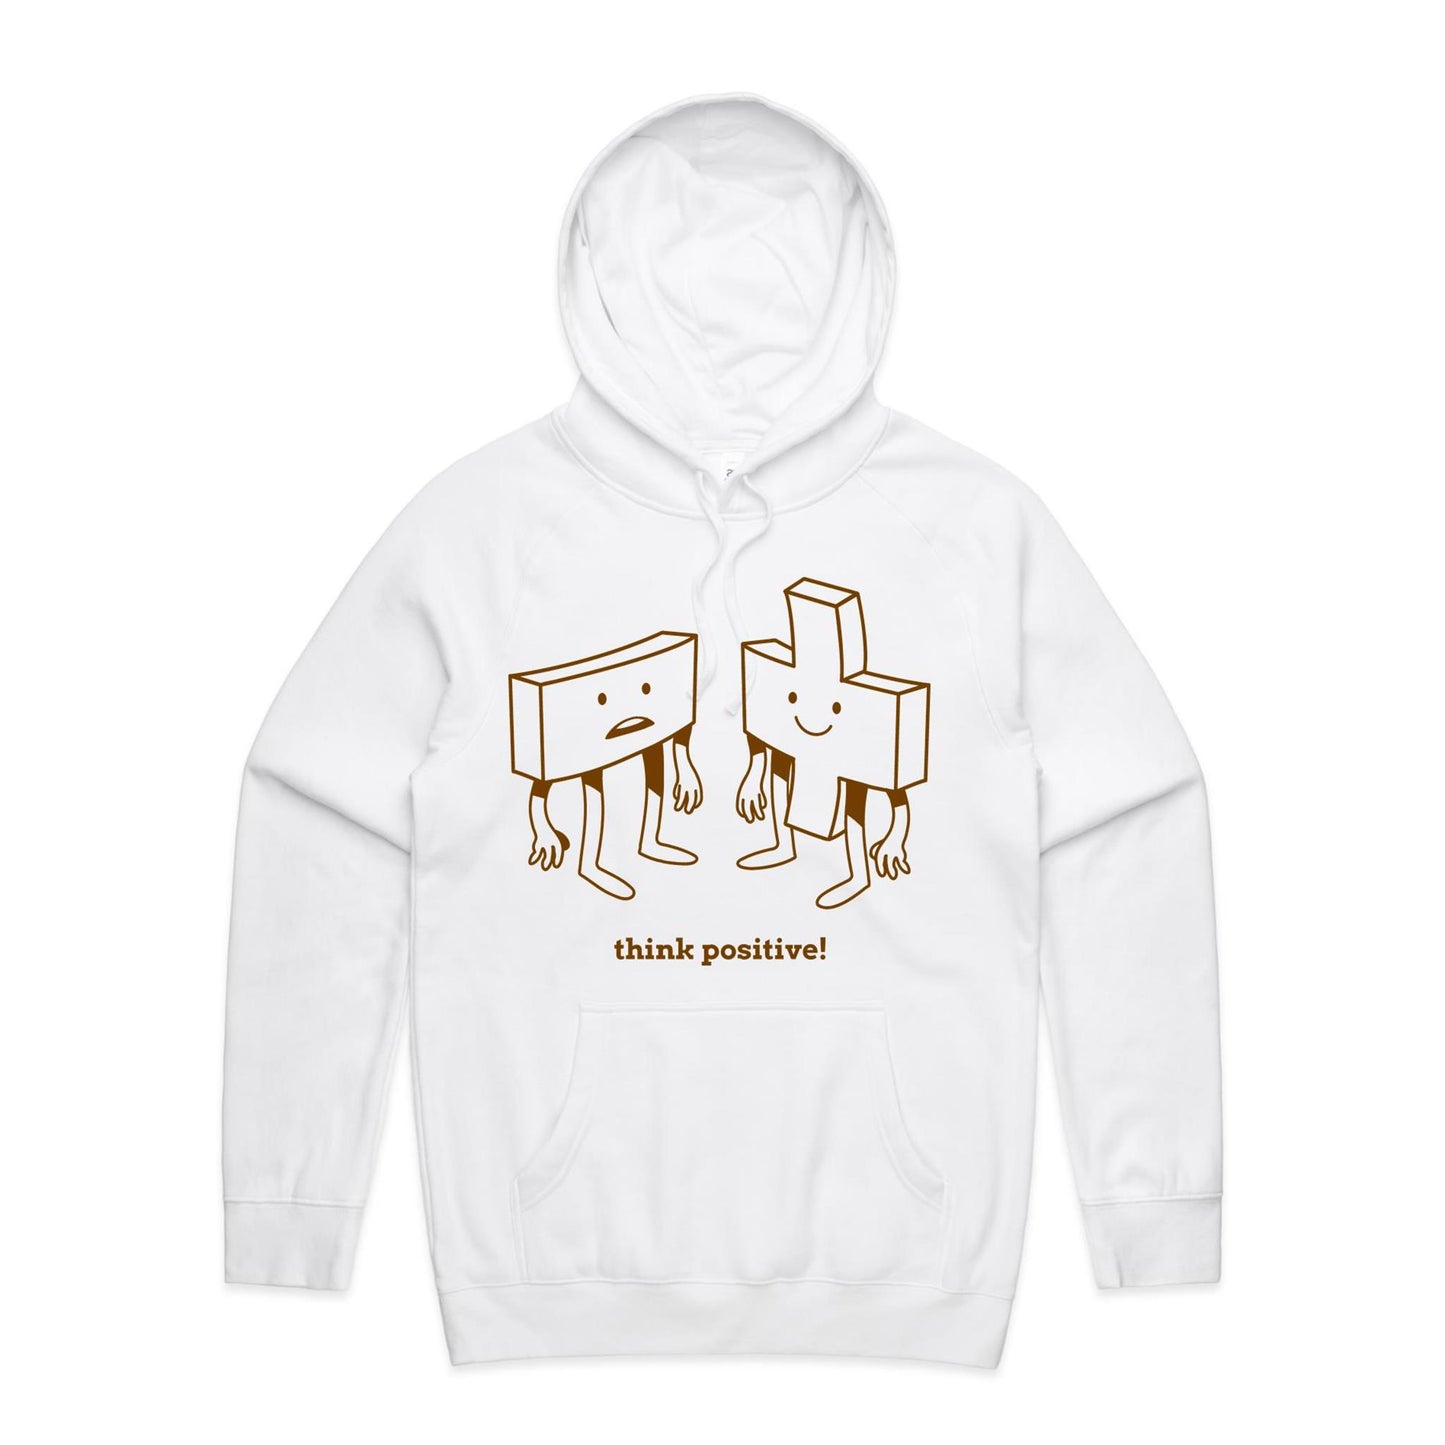 Think Positive, Plus And Minus - Supply Hood White Mens Supply Hoodie Maths Motivation